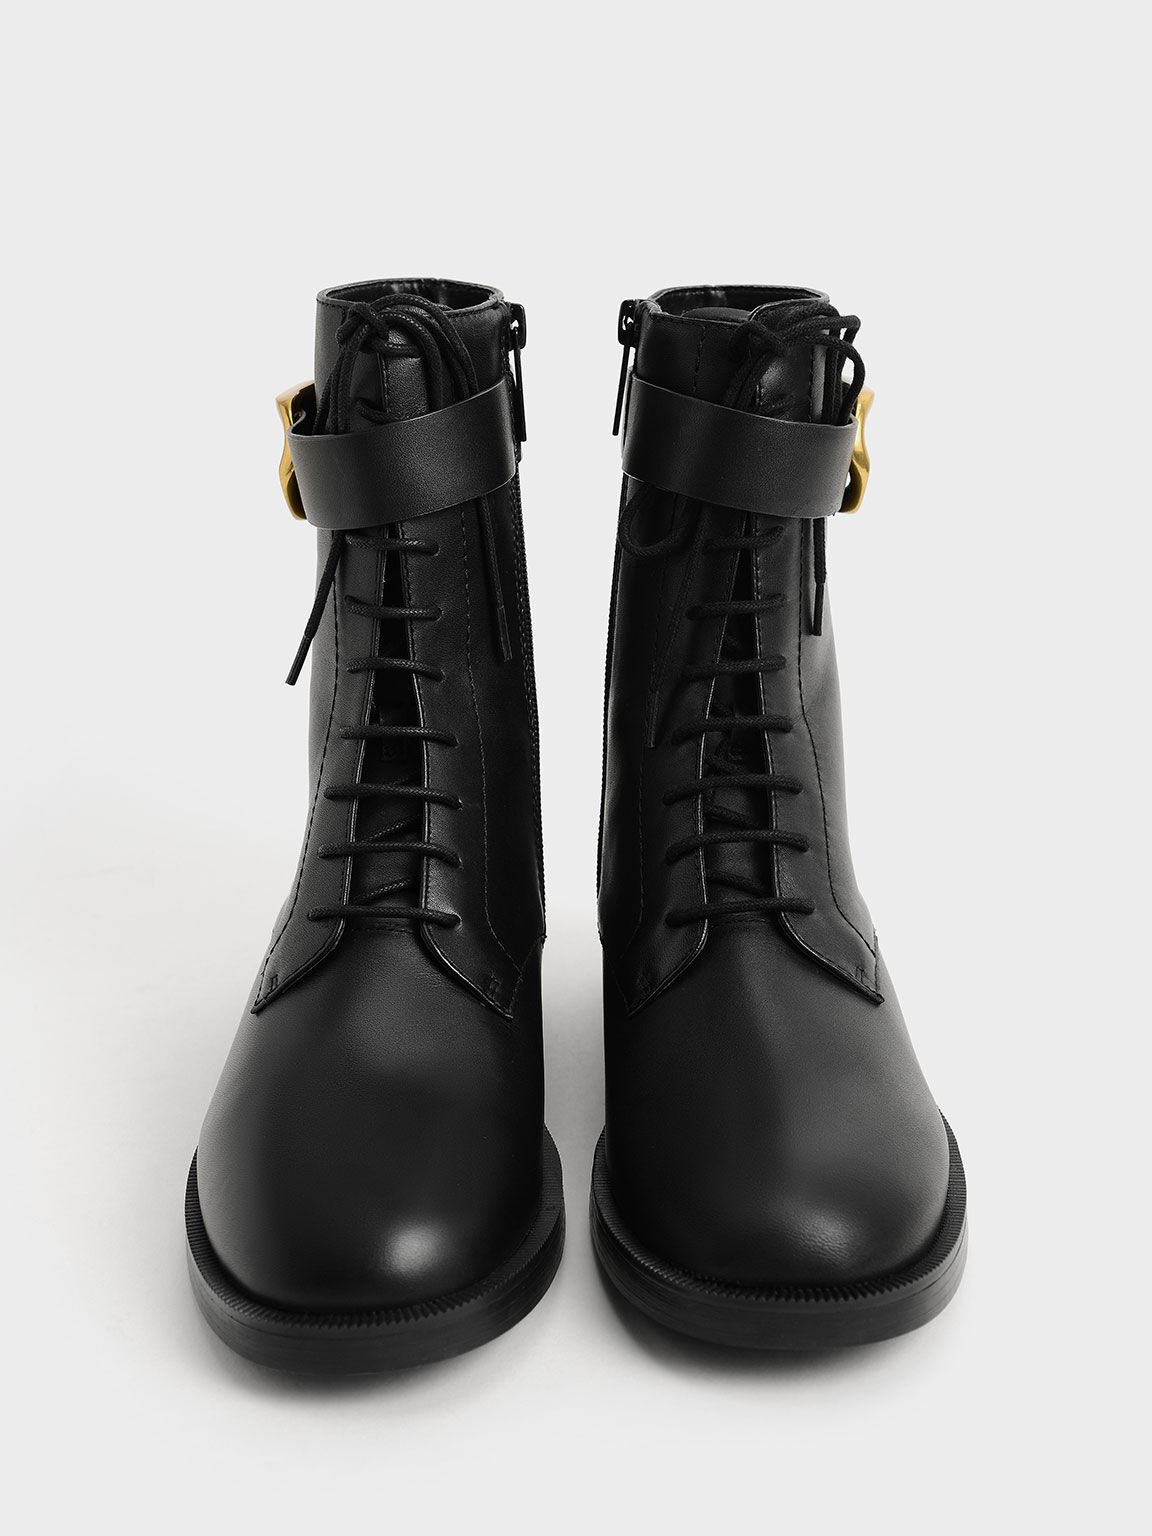 Gabine Leather Lace-Up Ankle Boots, Black, hi-res